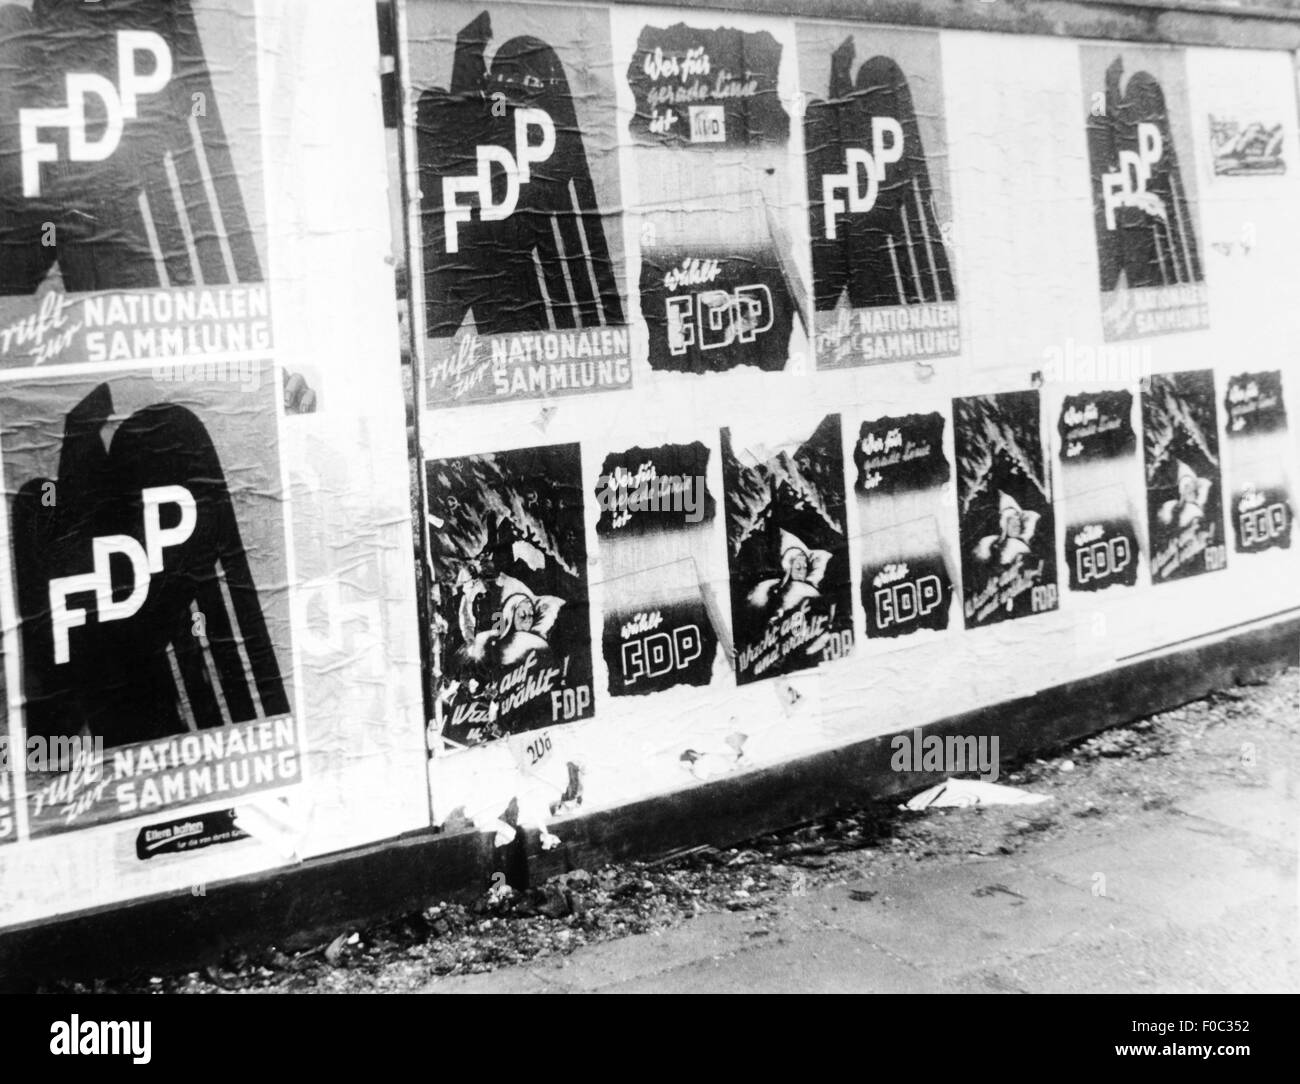 politics, elections, Germany, election campaign for the Federal Parliament 1953, election poster of the Free Democratic Party (FDP), hoarding, Bonn, 1953, detail, slogan 'Wake up and vote for FDP' and 'Call for the National Gathering', Additional-Rights-Clearences-Not Available Stock Photo